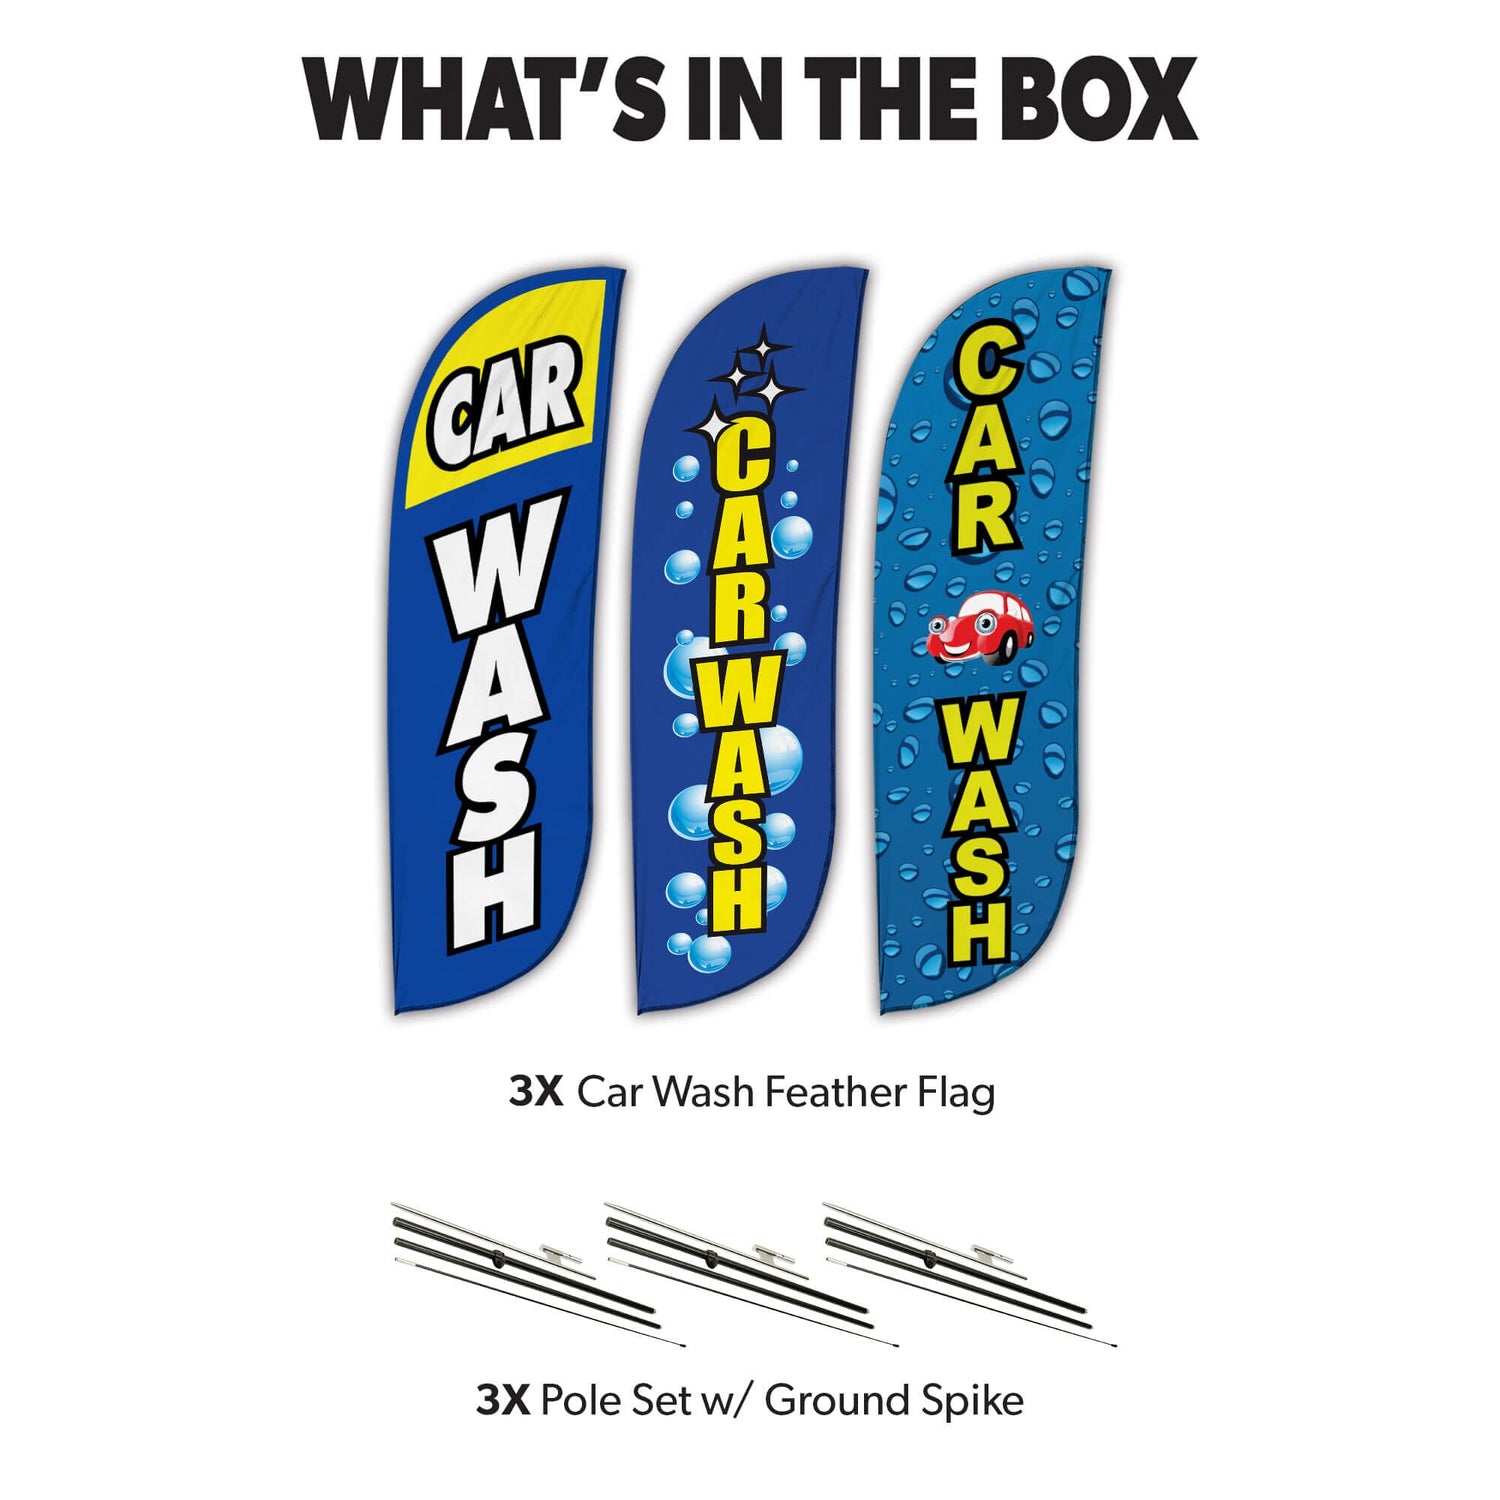 Car Wash Feather Flag - Variety 3 Pack w/ Ground Spike Pole Set 